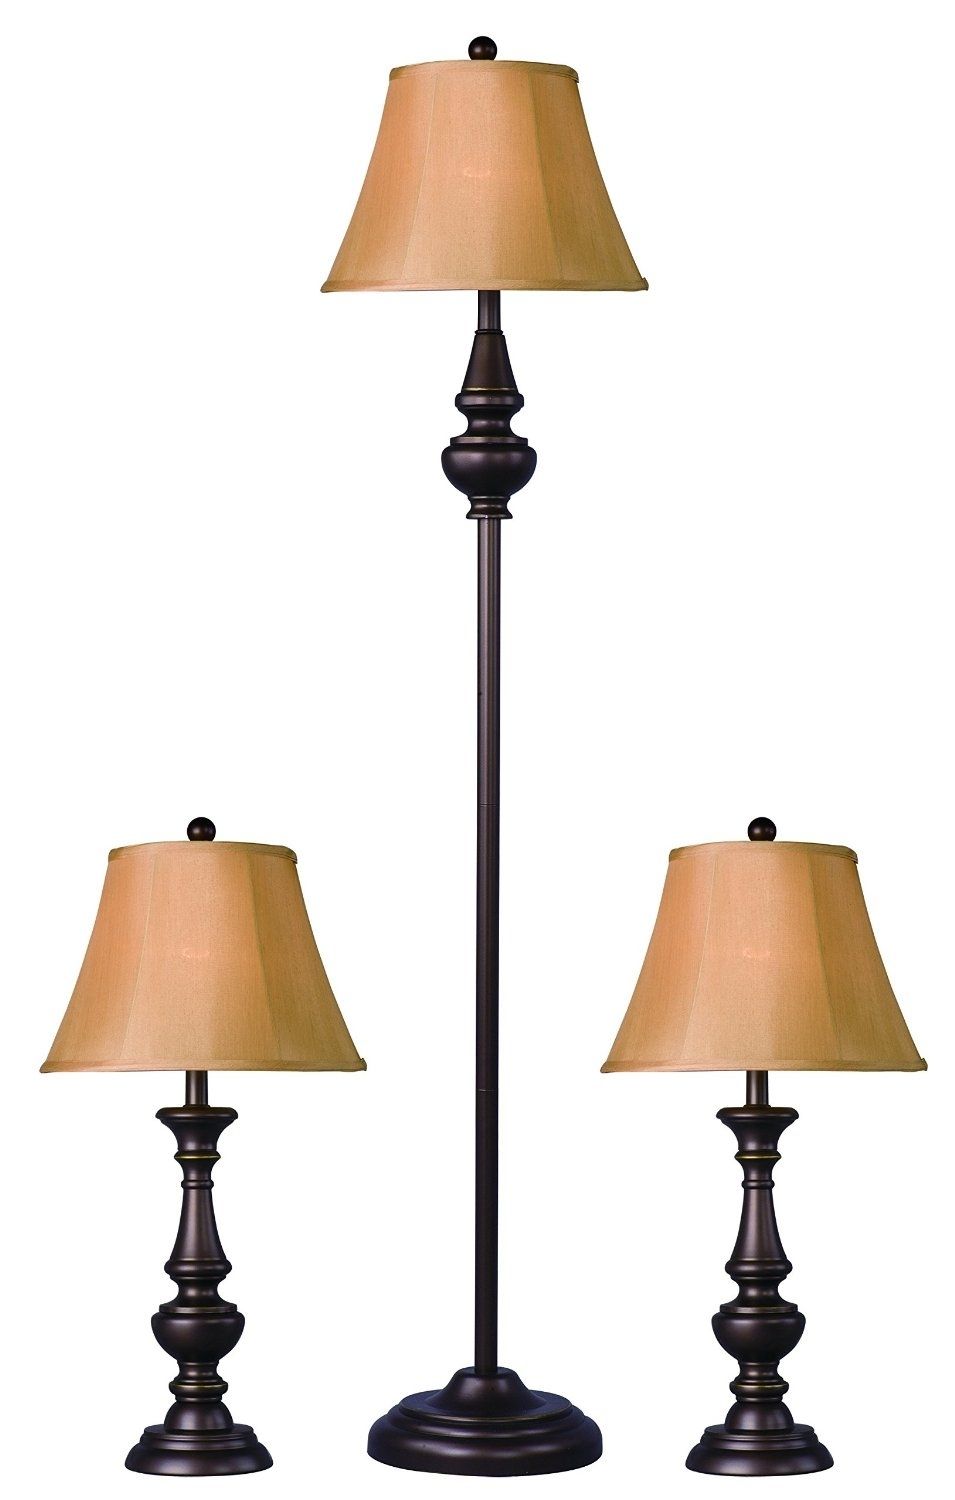 Living Room Lamp Set Antique Bronze Table Lamp Set With Hand Crafted Inside Living Room Table Lamps Sets (View 13 of 15)